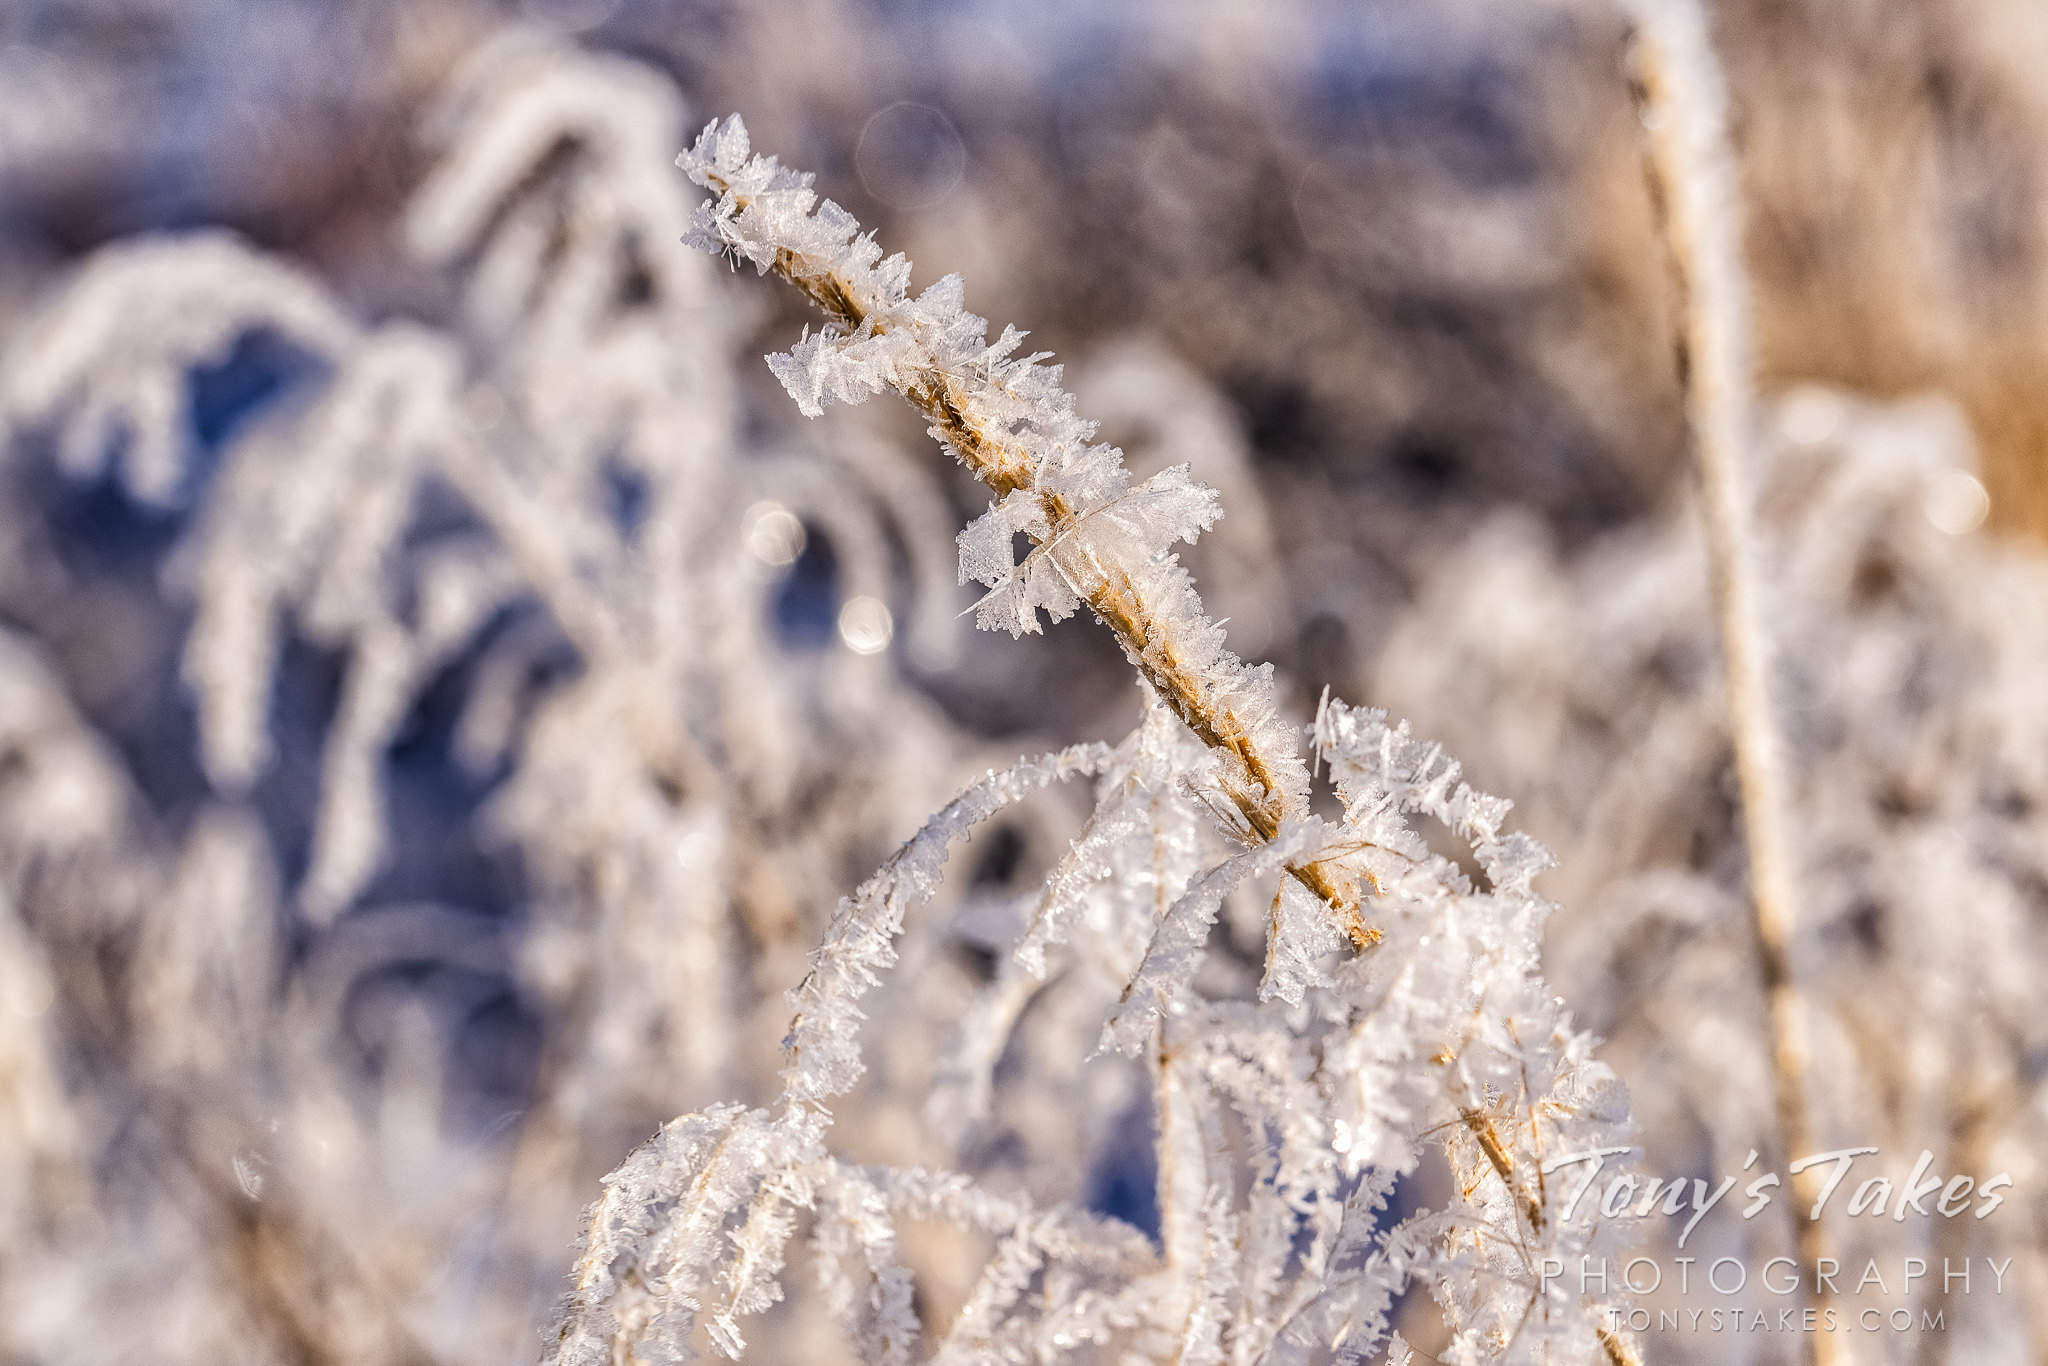 Hoar frost coats the grasses and plants on the Colorado plains. (© Tony's Takes)